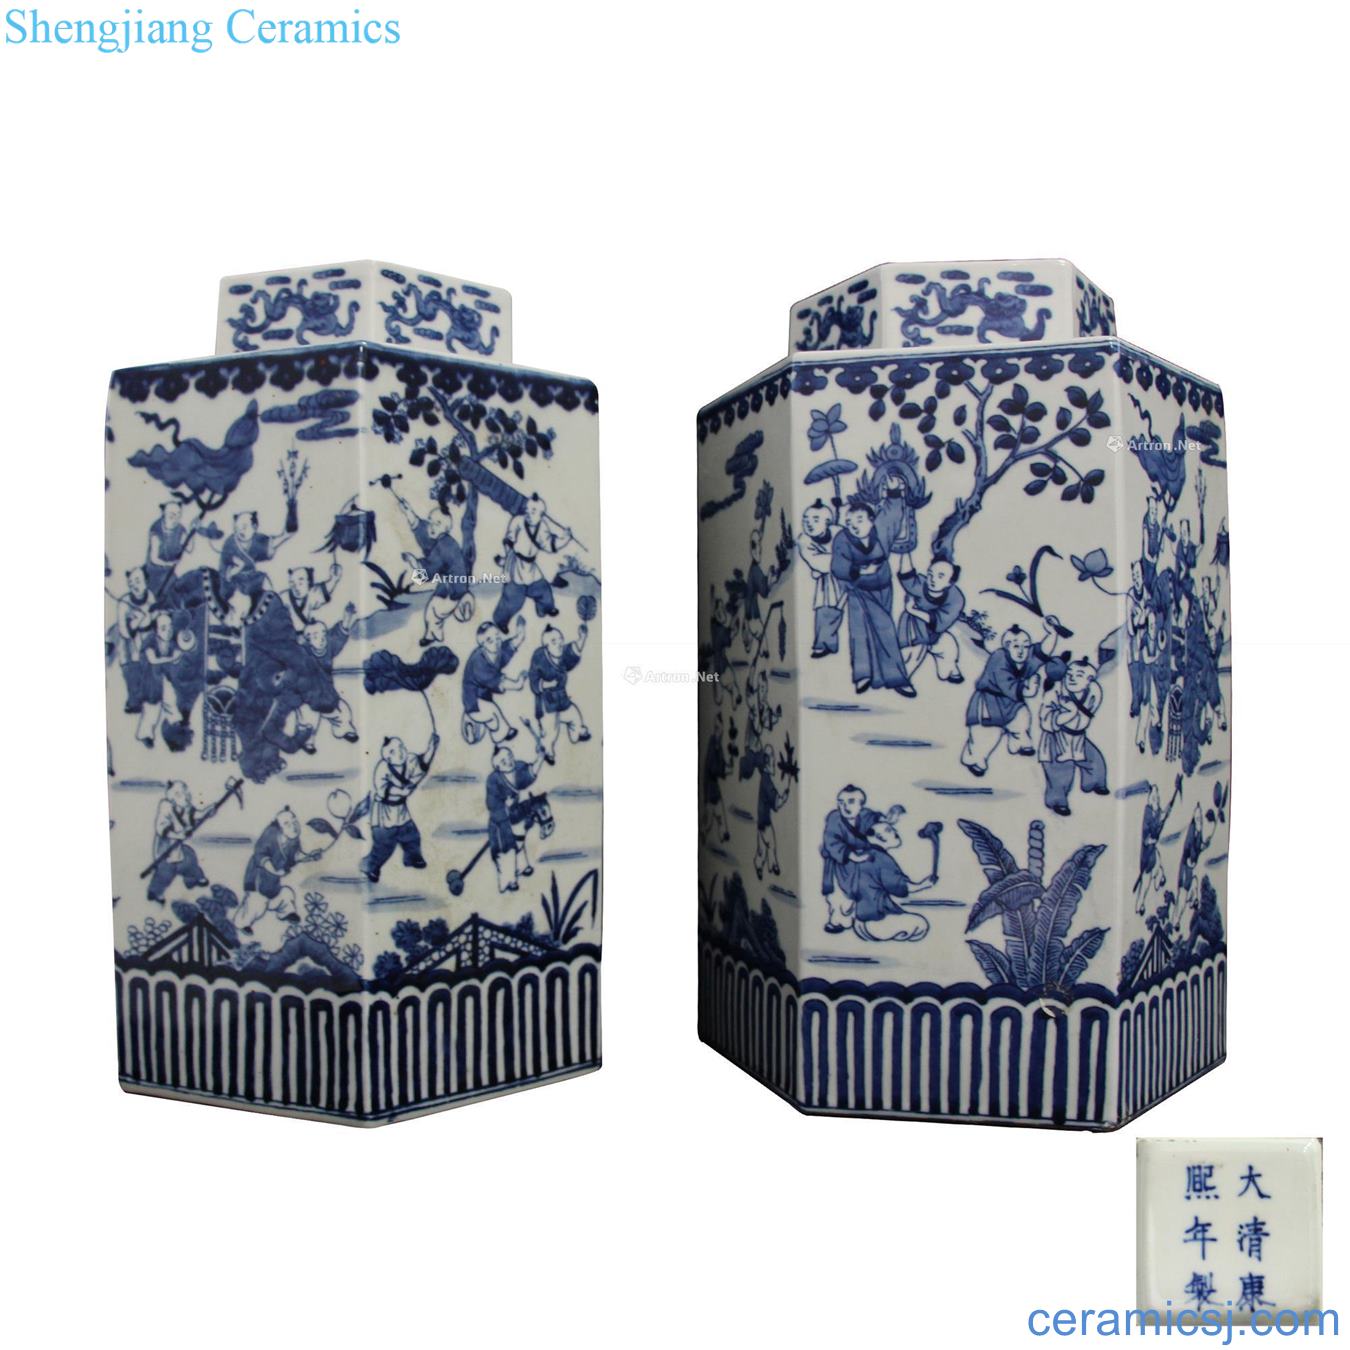 In the Ming dynasty Blue and white figure six-party caddy the ancient philosophers